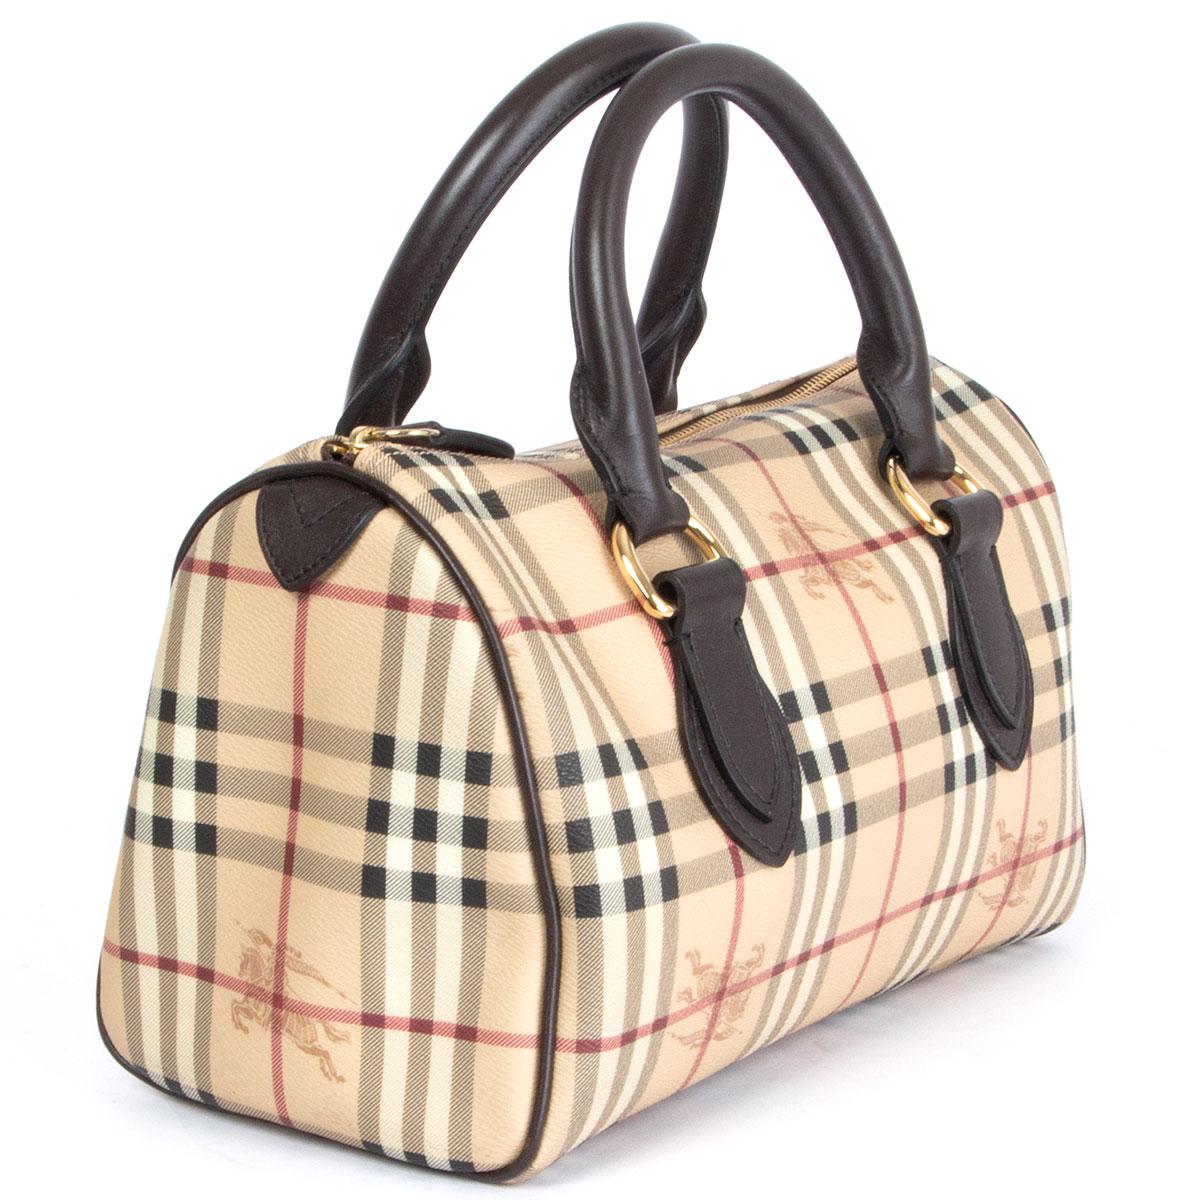 100% authentic Burberry Haymarket Medium bowling bag in beige, red, black and white coated canvas featuring brown leather handles and gold-tone trimming. Lined in brown canvas with one open pocket against the back. Has been worn and is in excellent